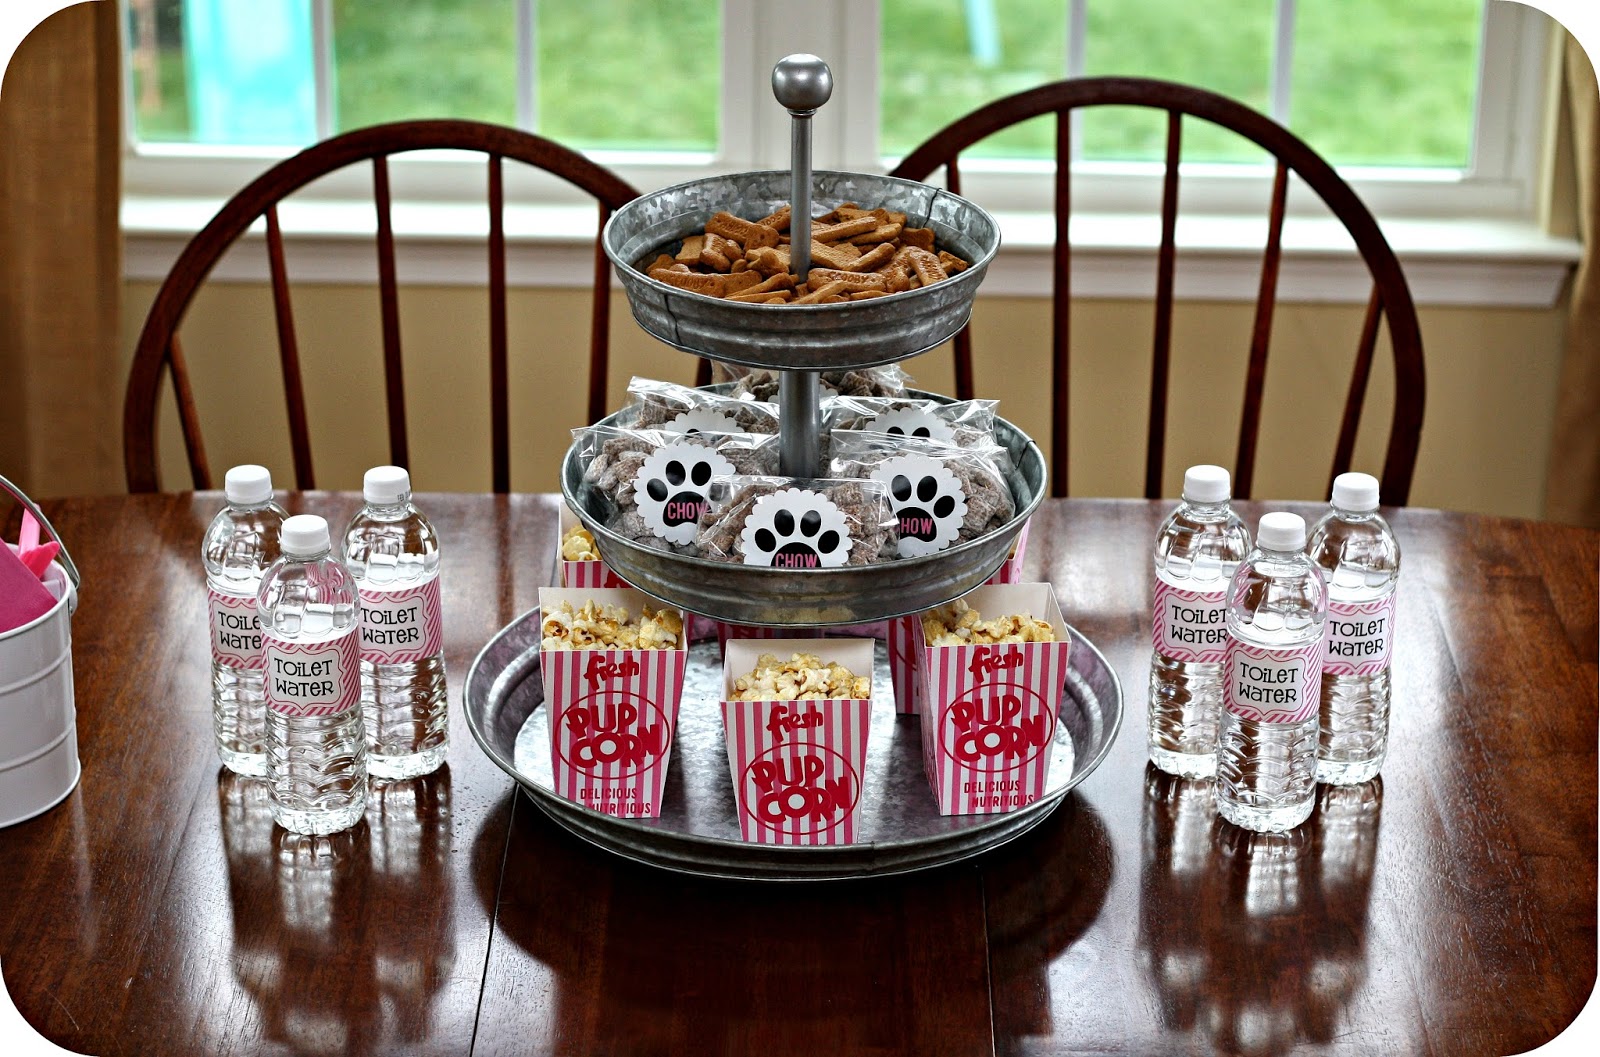 Keeping My Cents    Dog  Birthday  Party  Ideas  